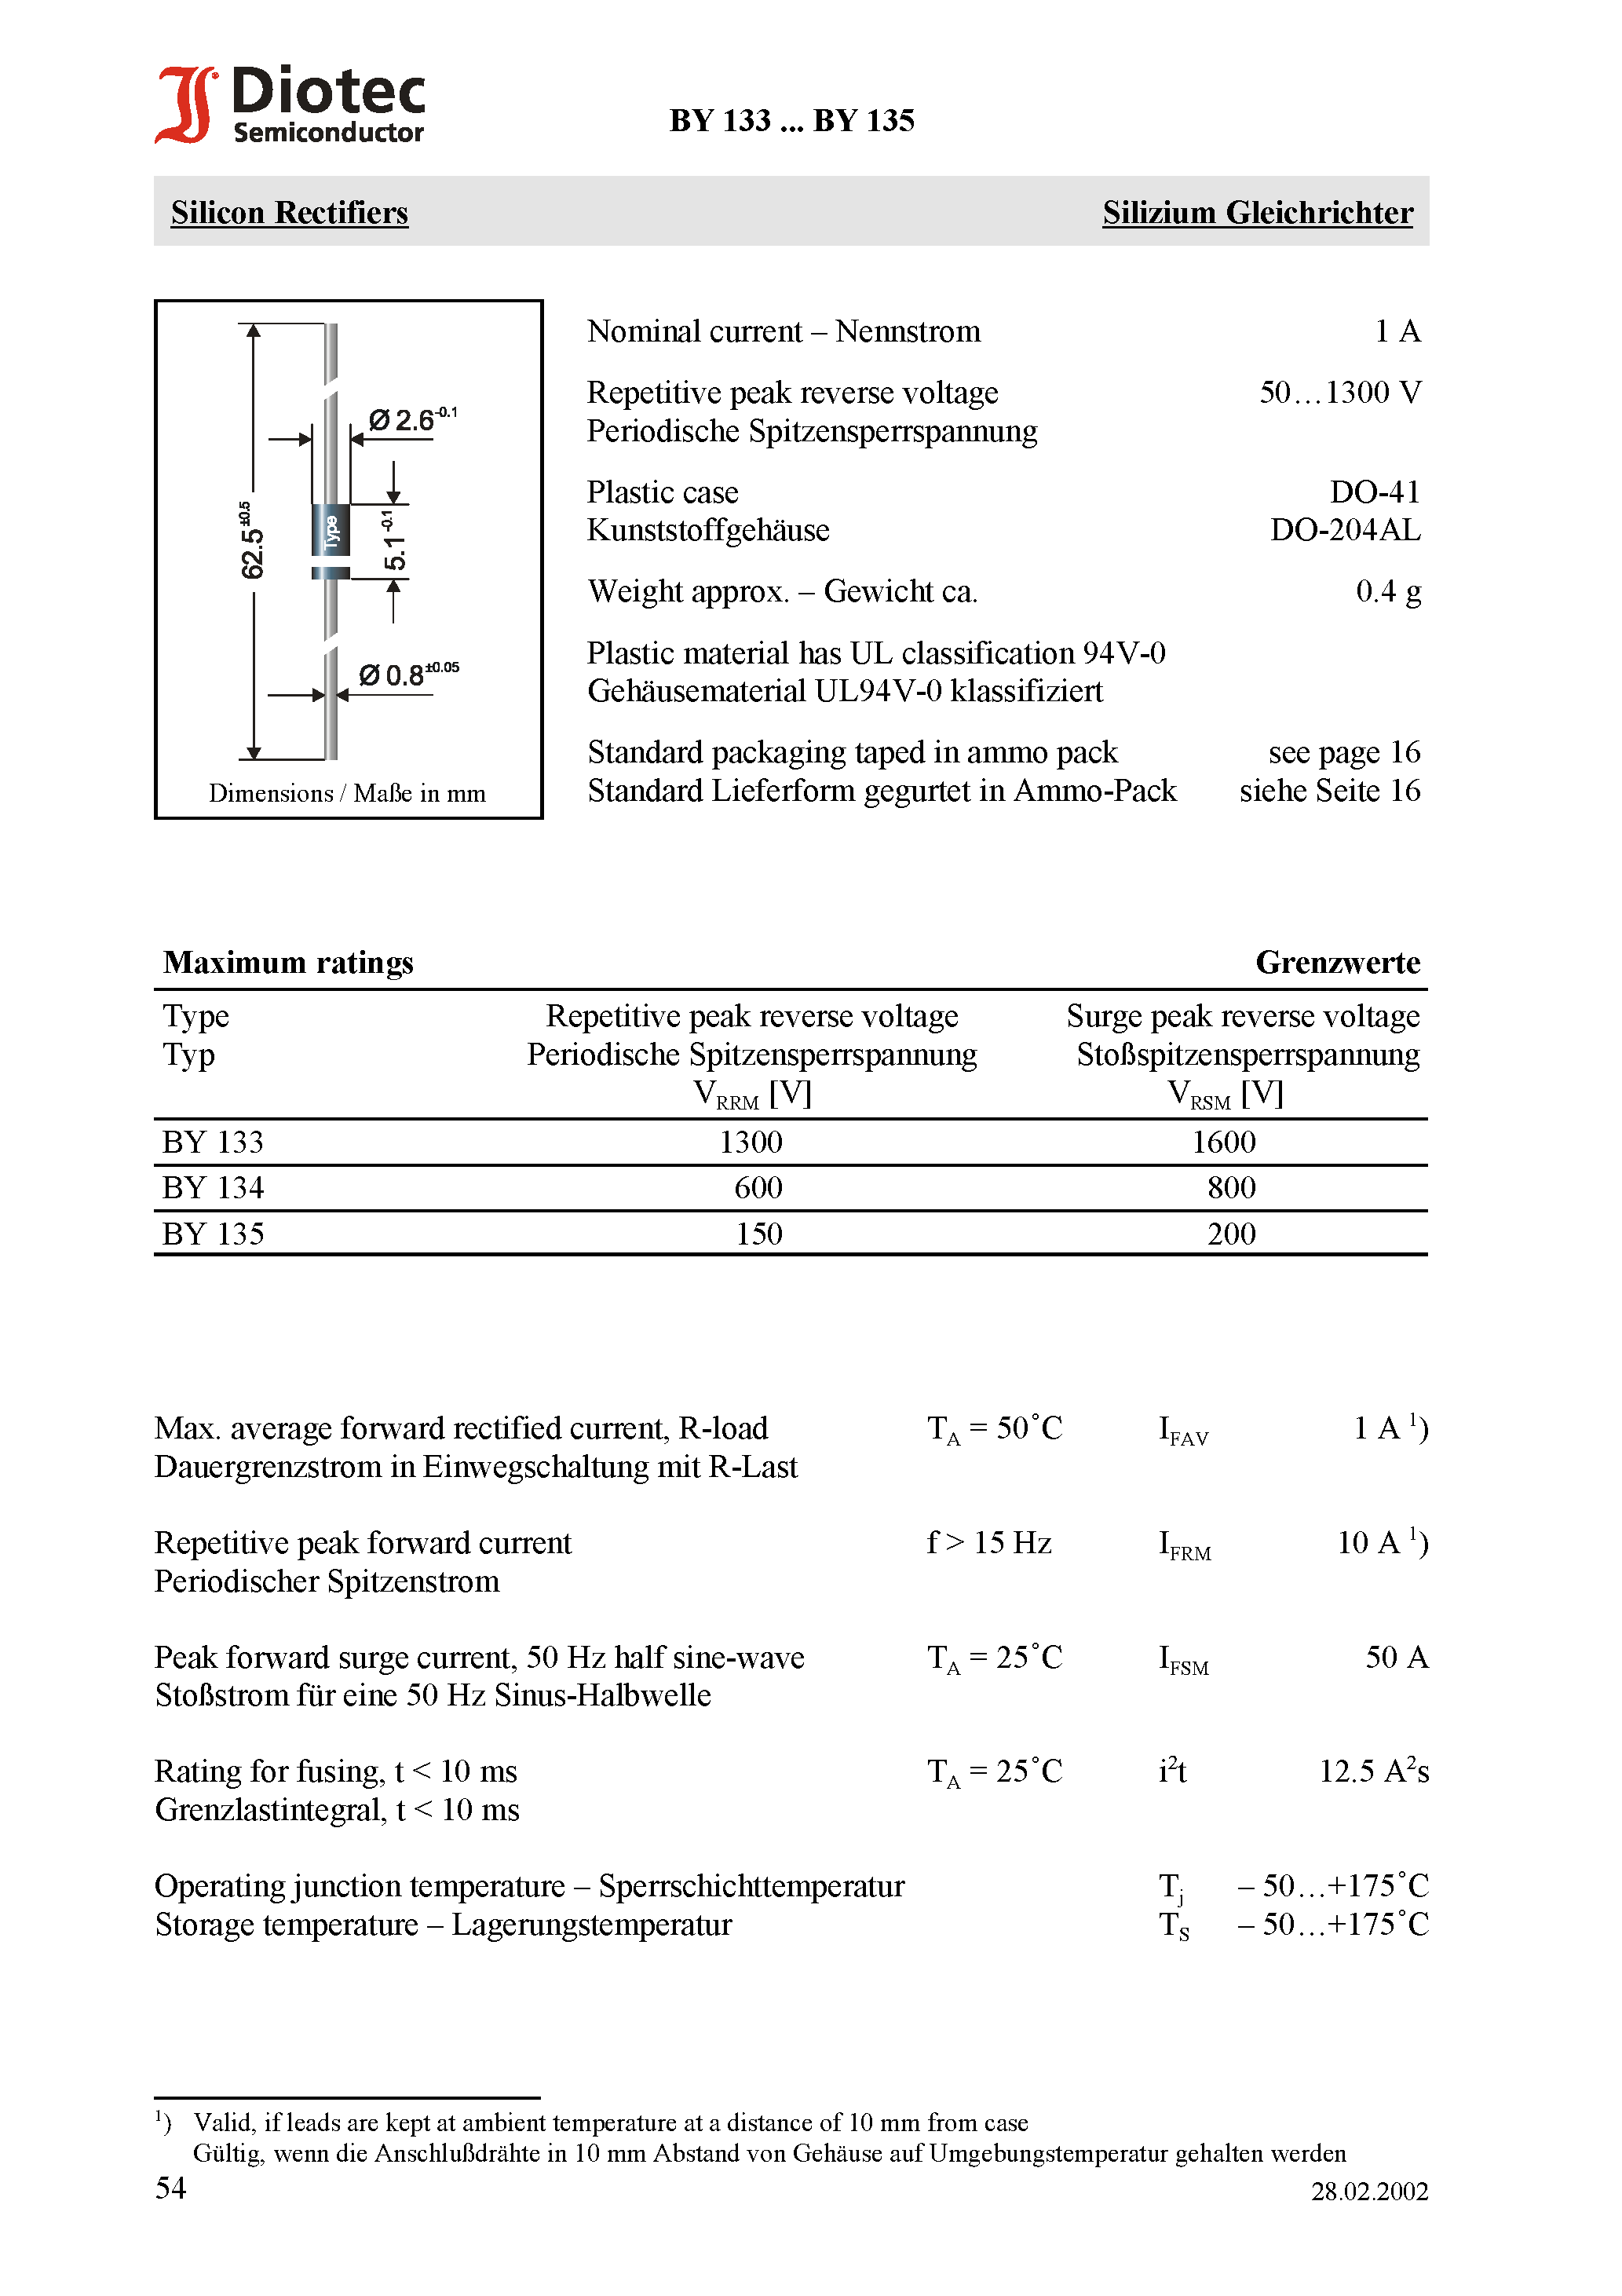 Datasheet BY135 - Silicon Rectifiers page 1